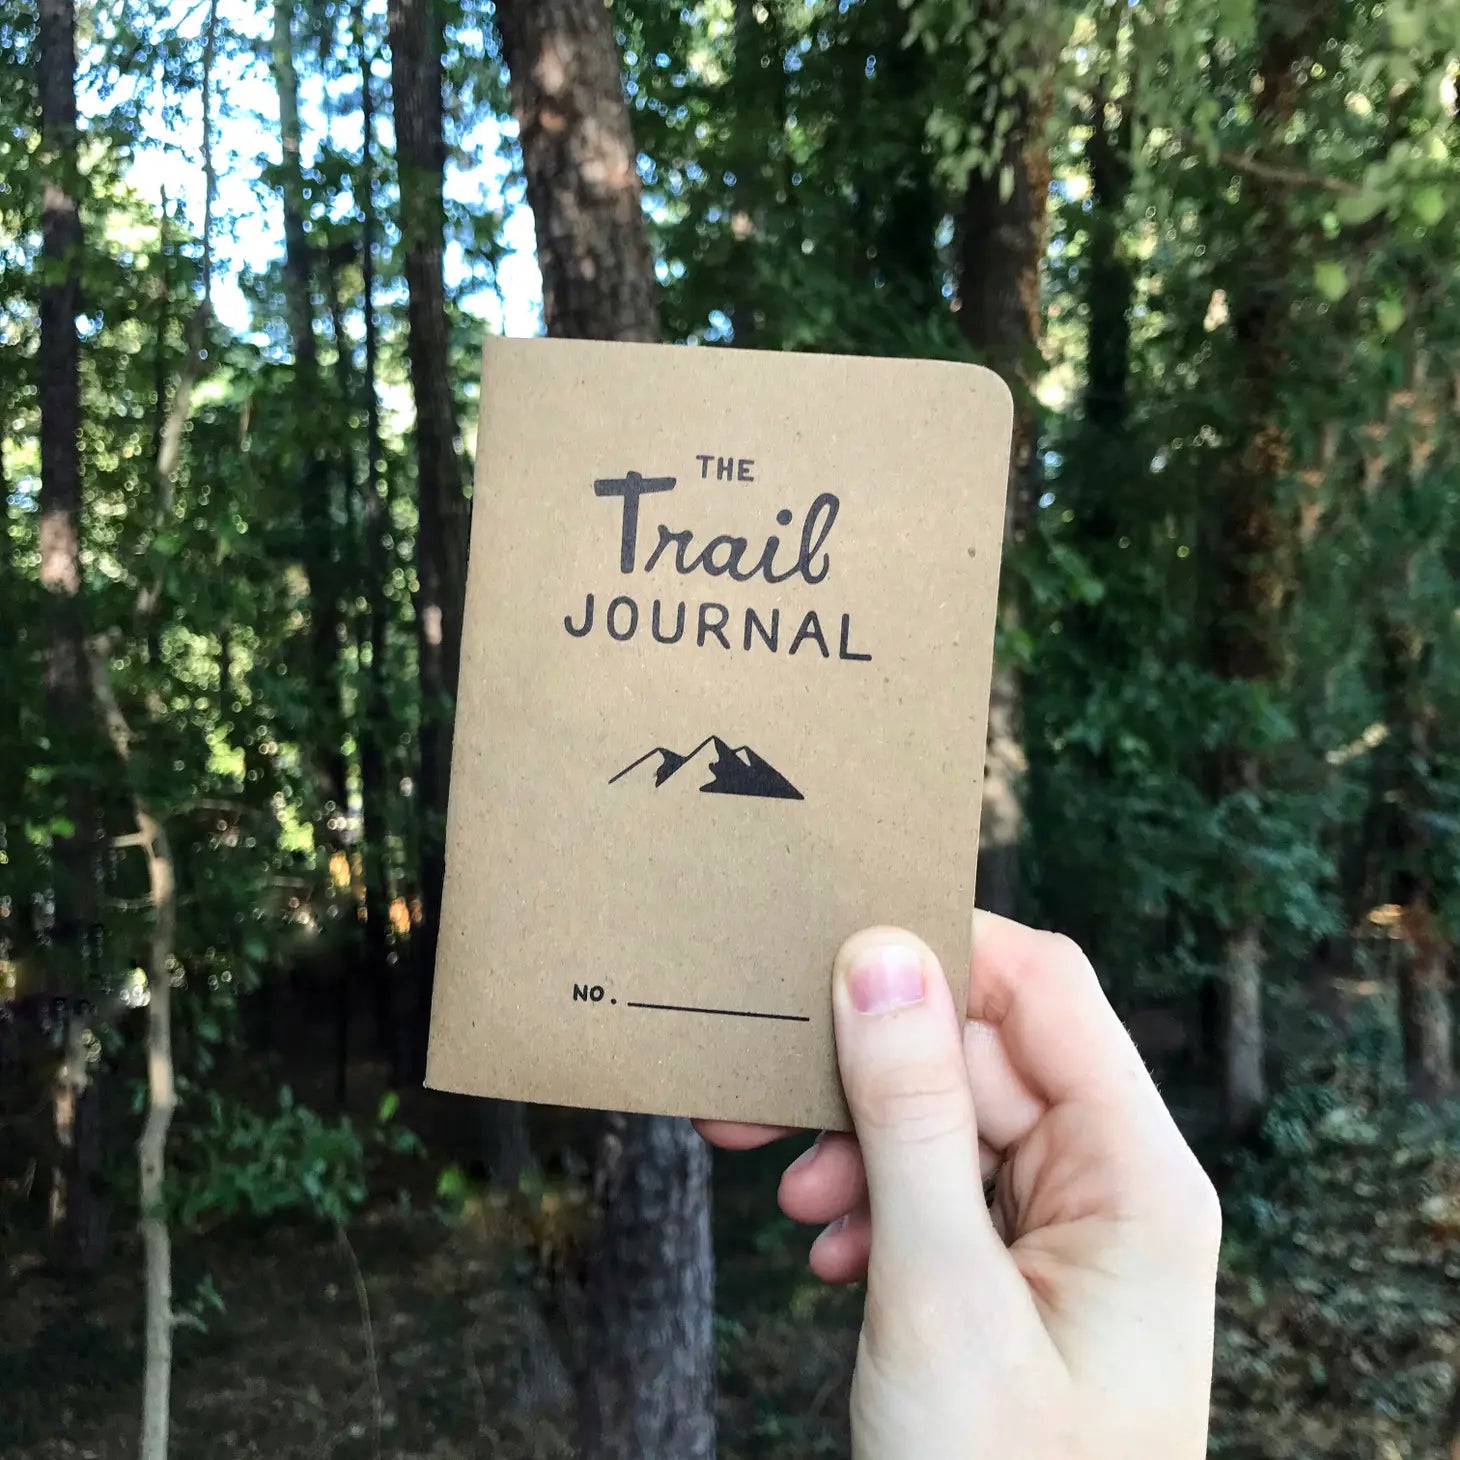 The Trail Journal - Original Edition